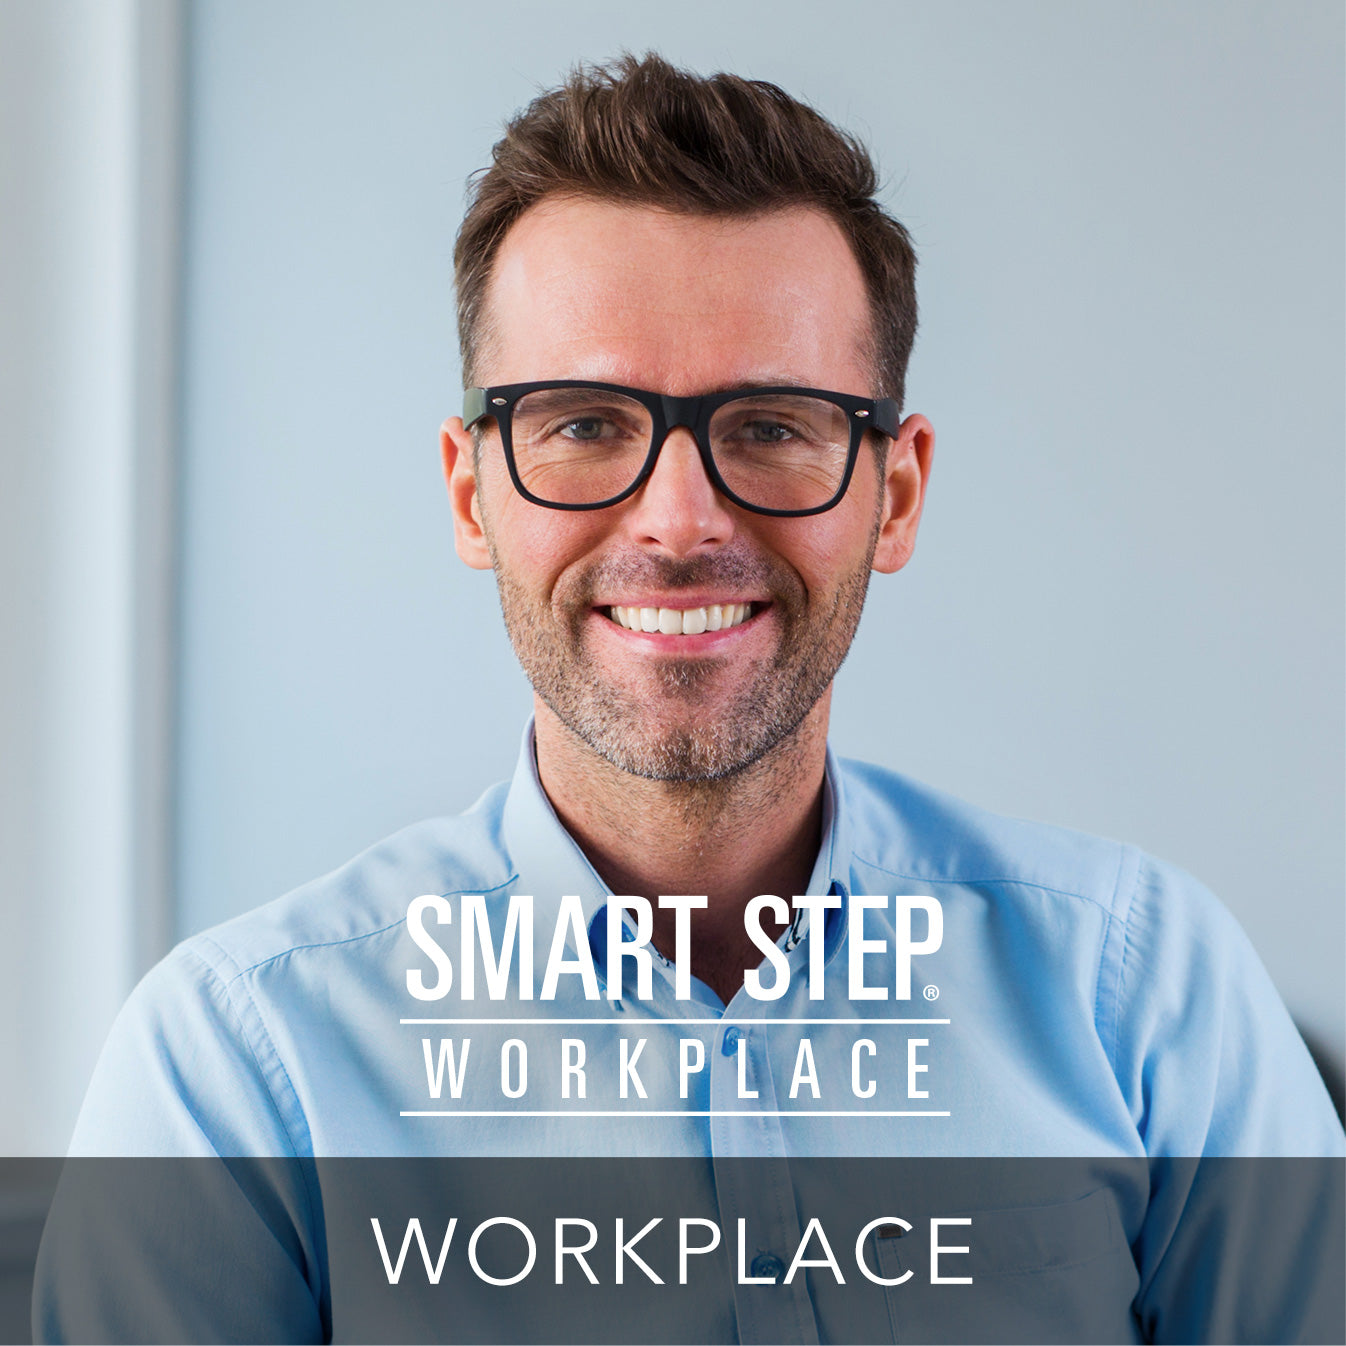 Smart Step Premium Anti-Fatigue Performance Mats for the Workplace